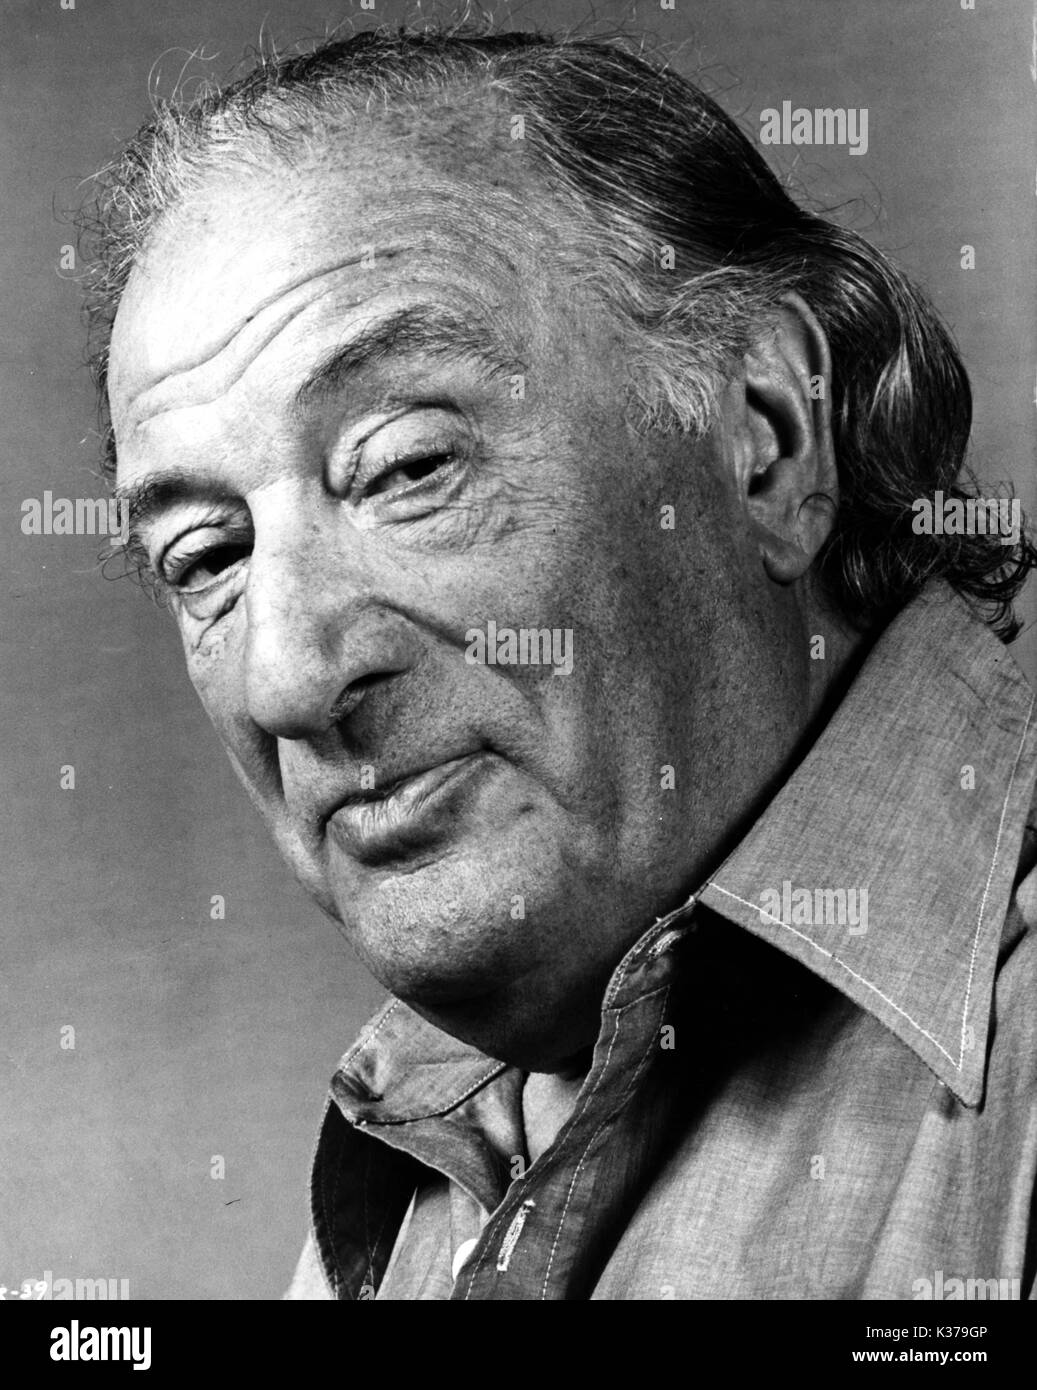 Sam spiegel hi-res stock photography and images - Alamy